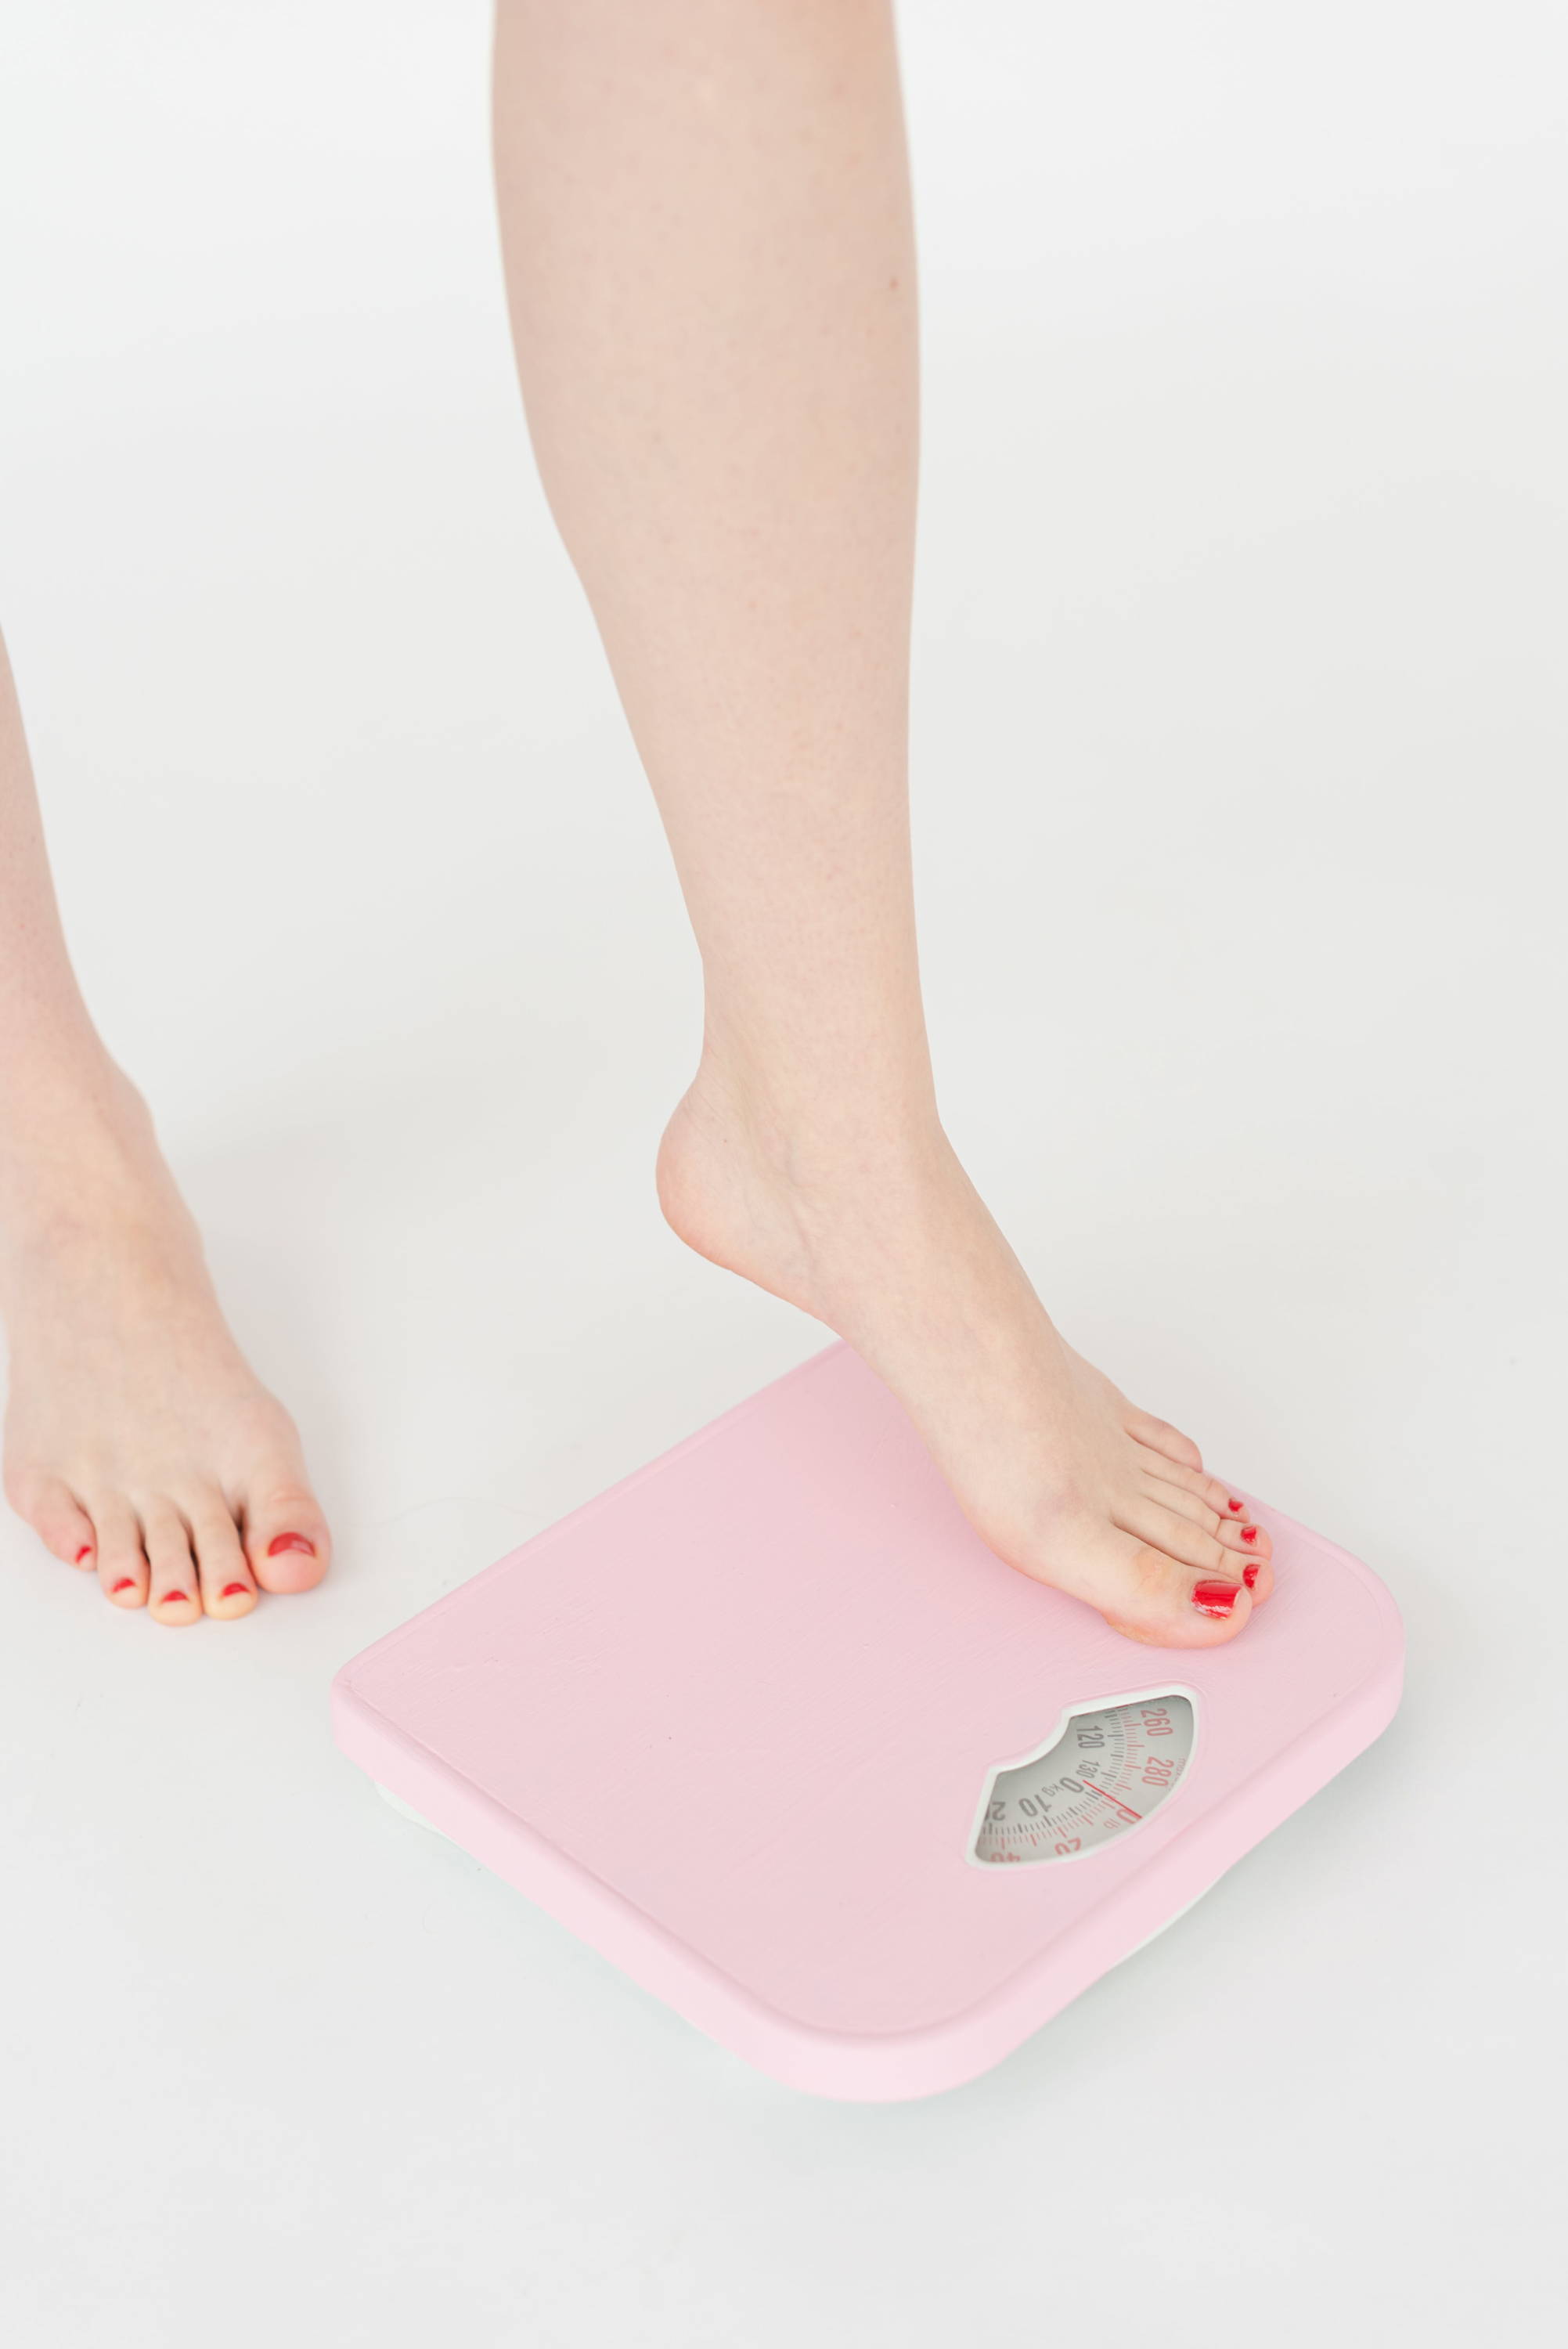 Woman's foot stepping on pink scale